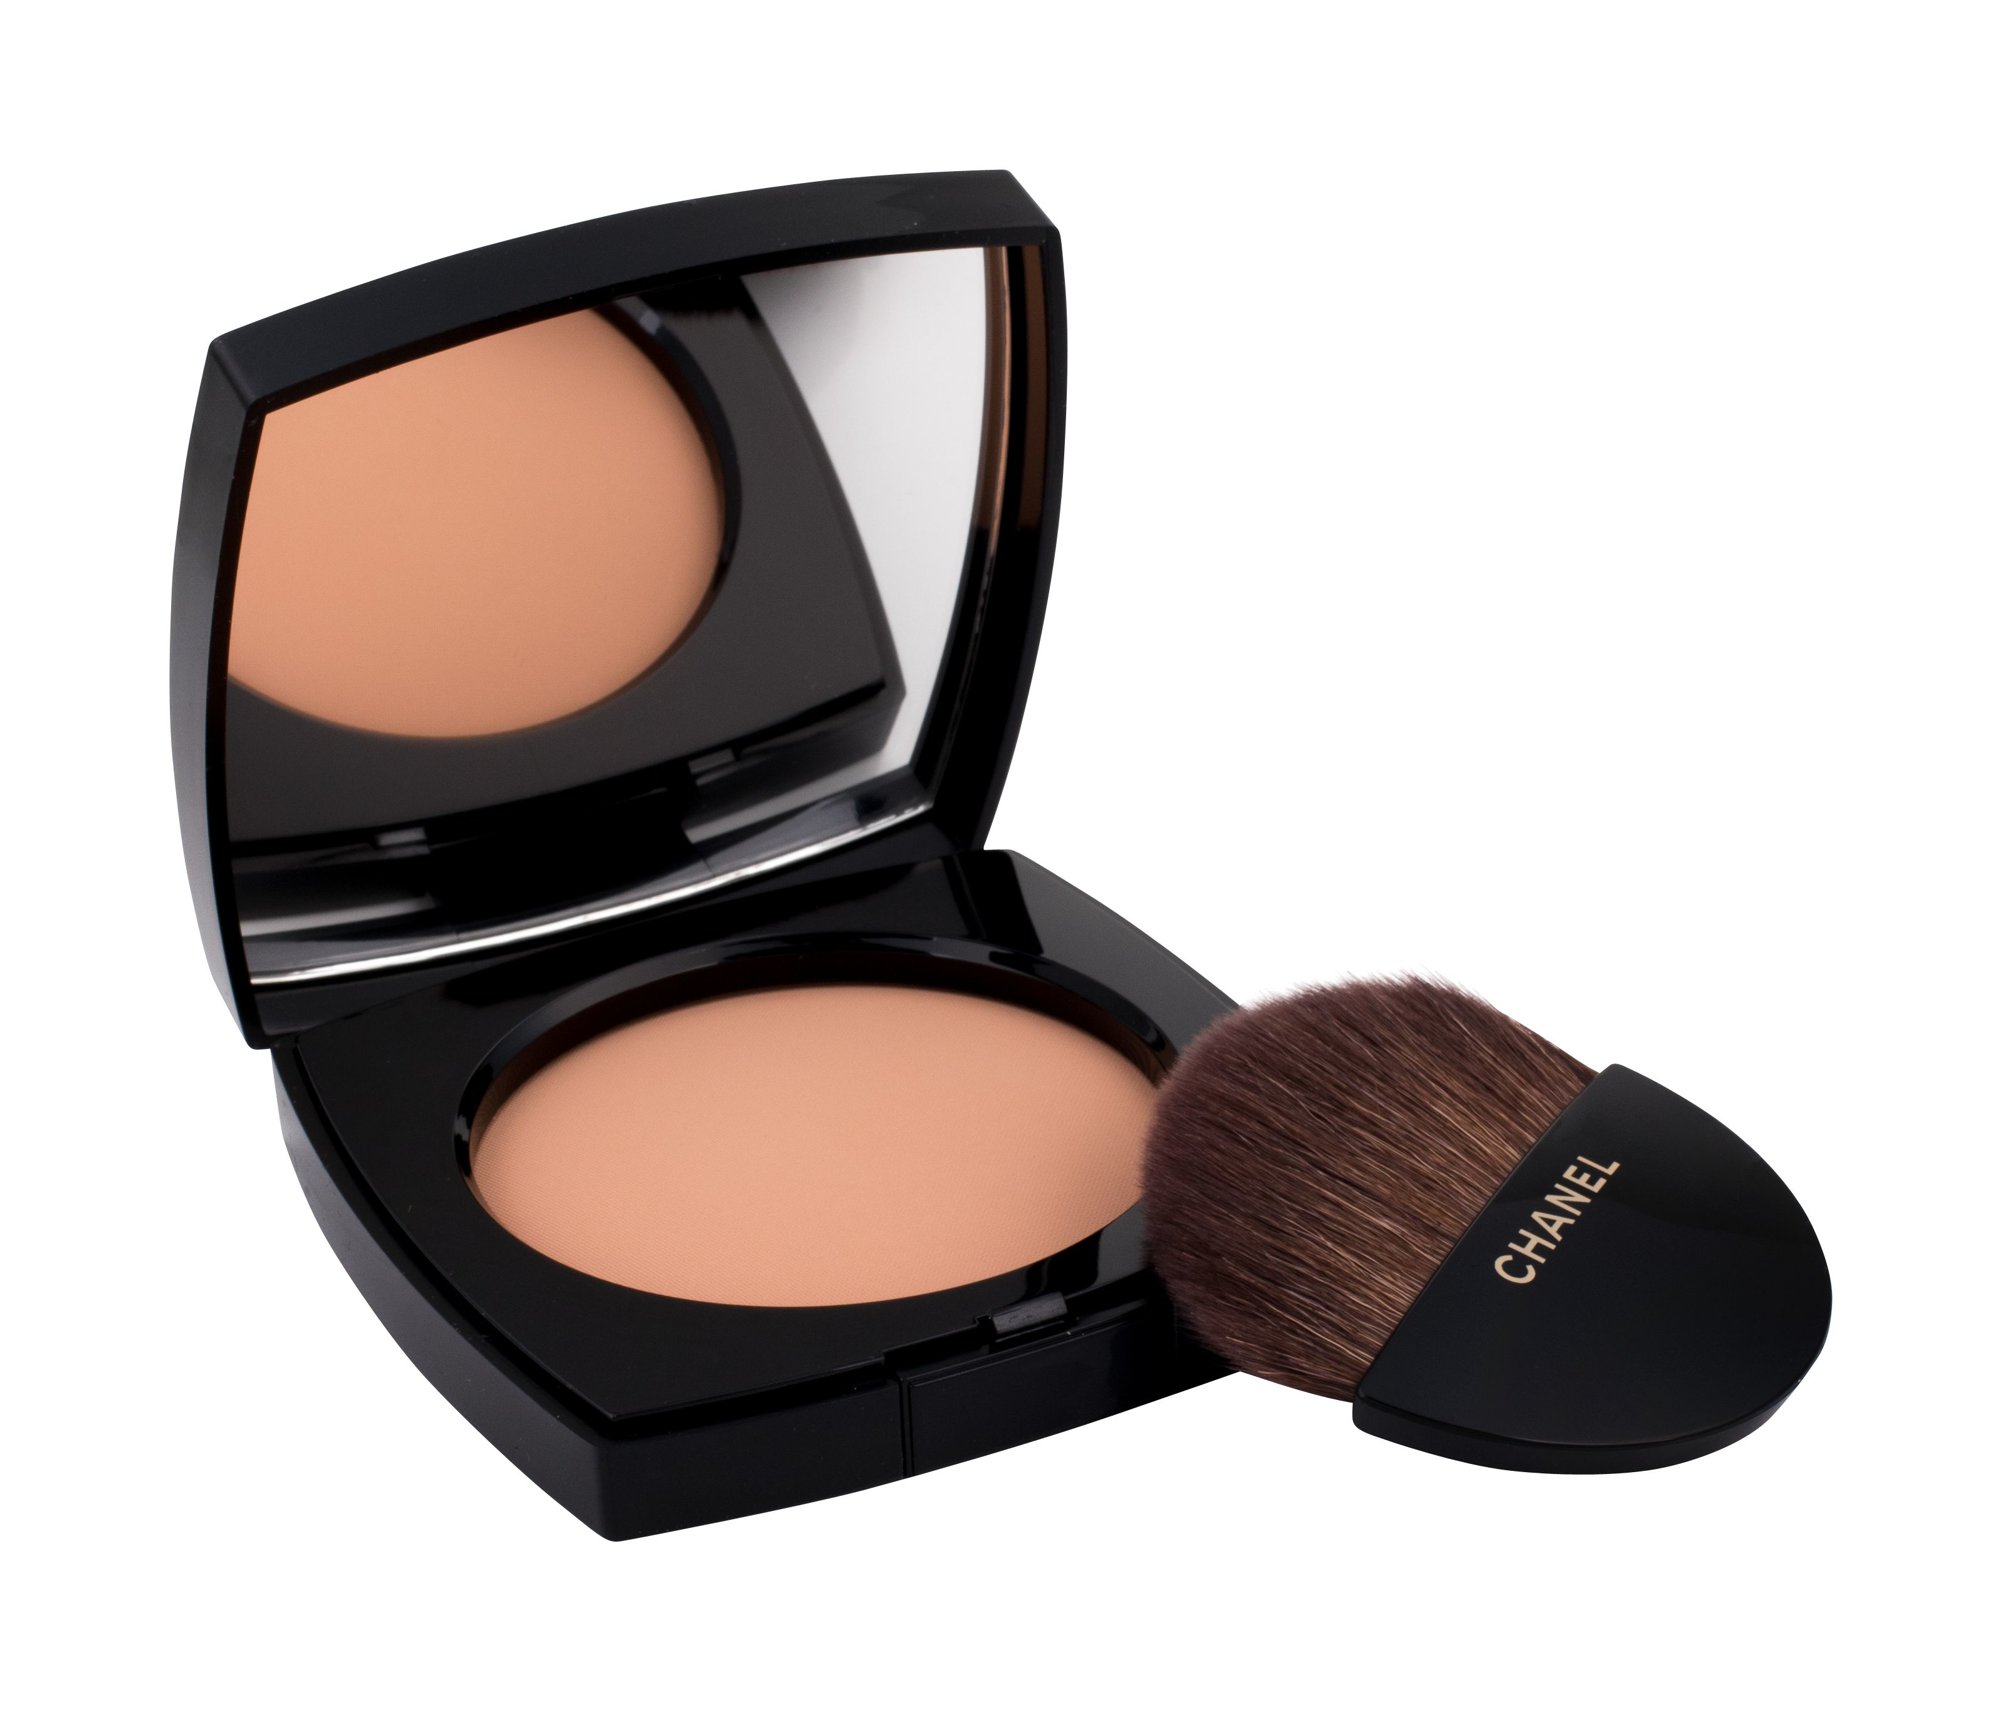 Chanel Les Beiges Healthy Glow Sheer Powder 12g sausa pudra